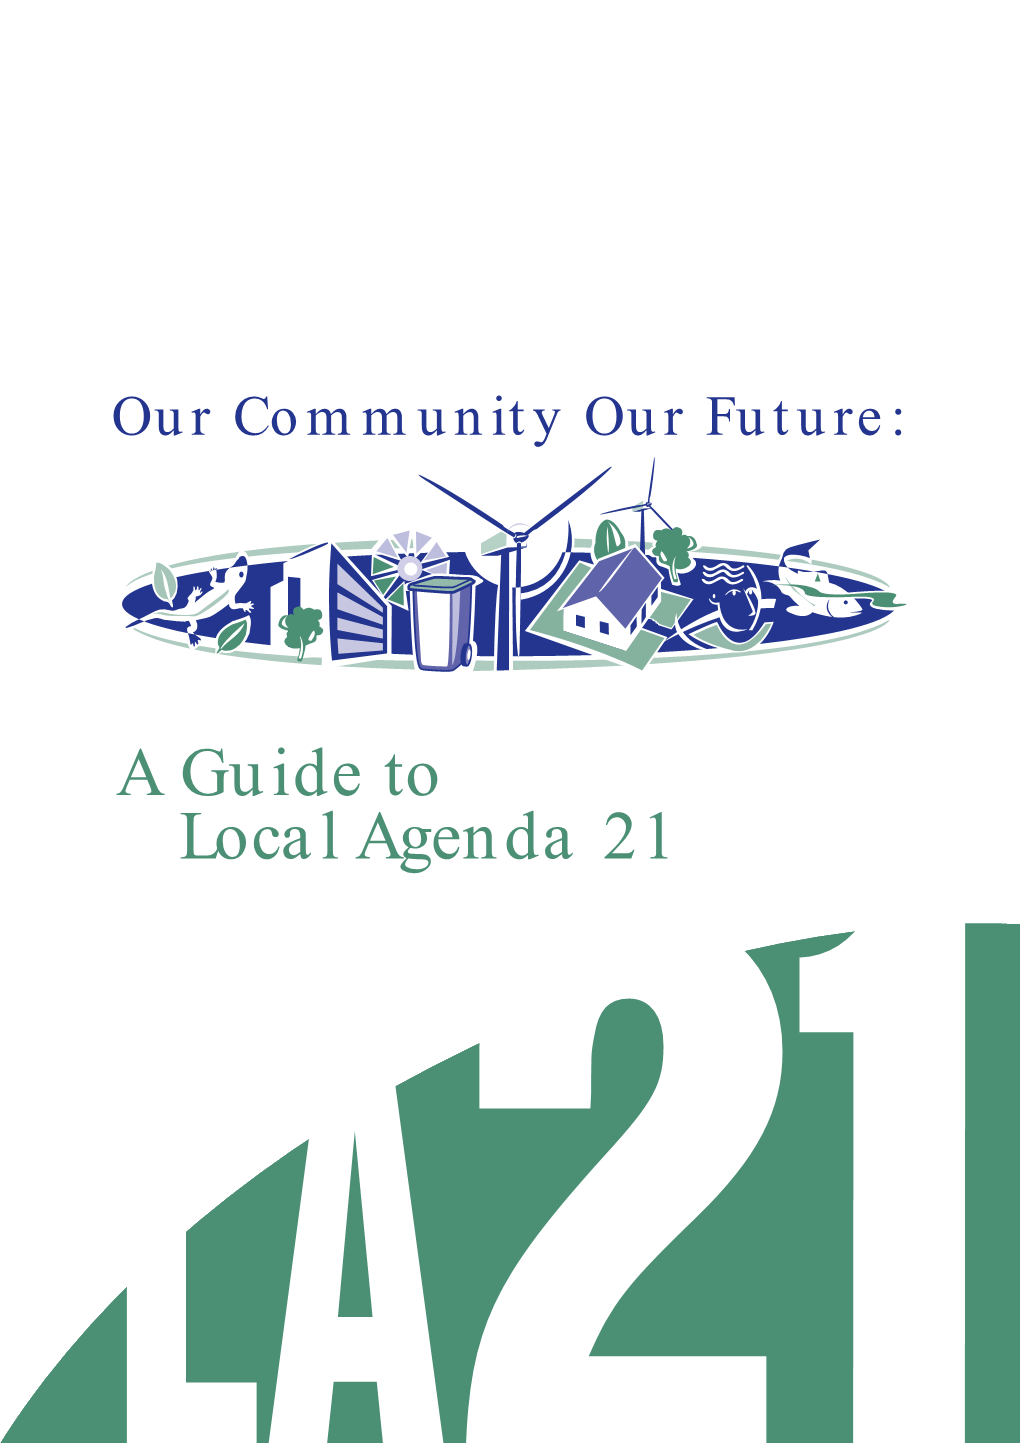 Our Community Our Future: a Guide to Local Agenda 21 Manual (PDF)